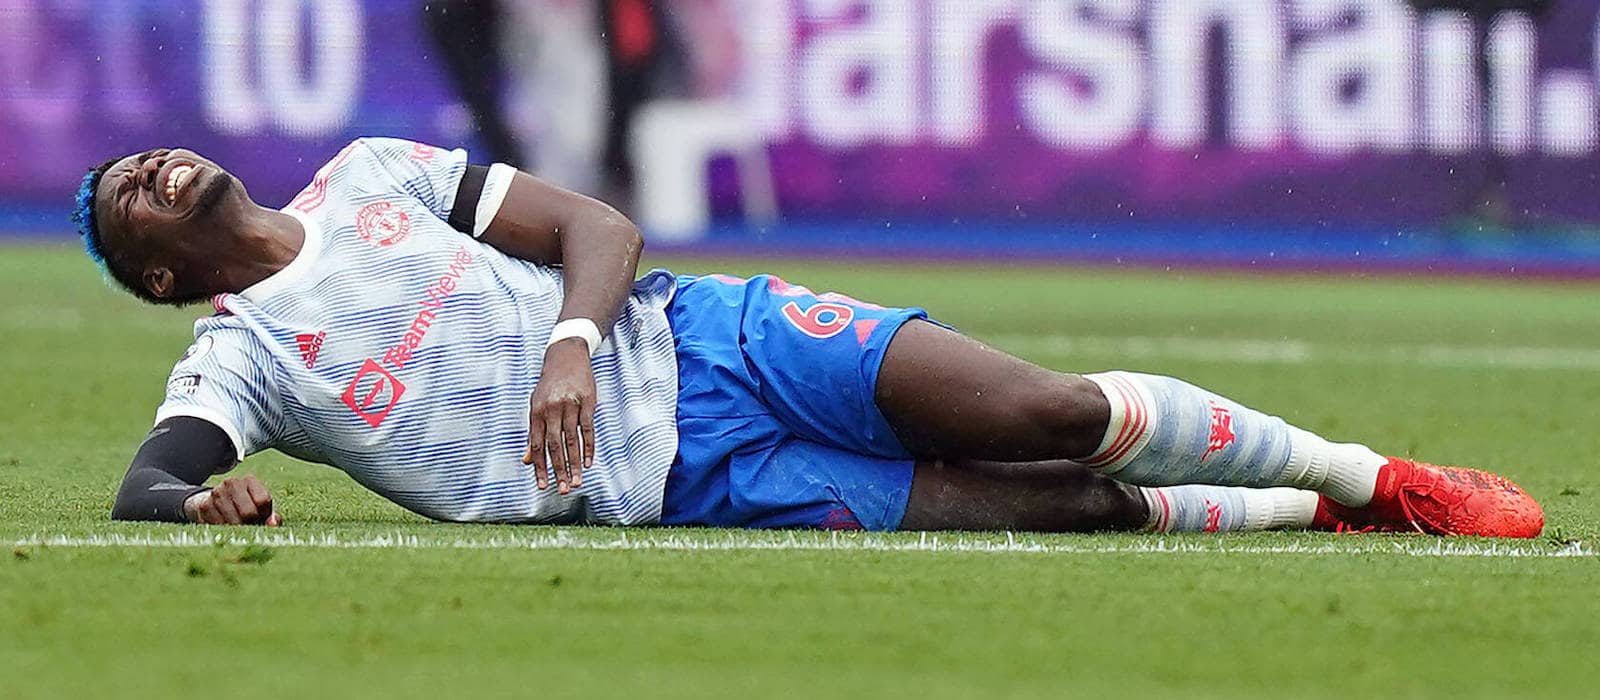 FIFA World Cup 2022: France's Pogba to miss World Cup after failing to recover from surgery - agent